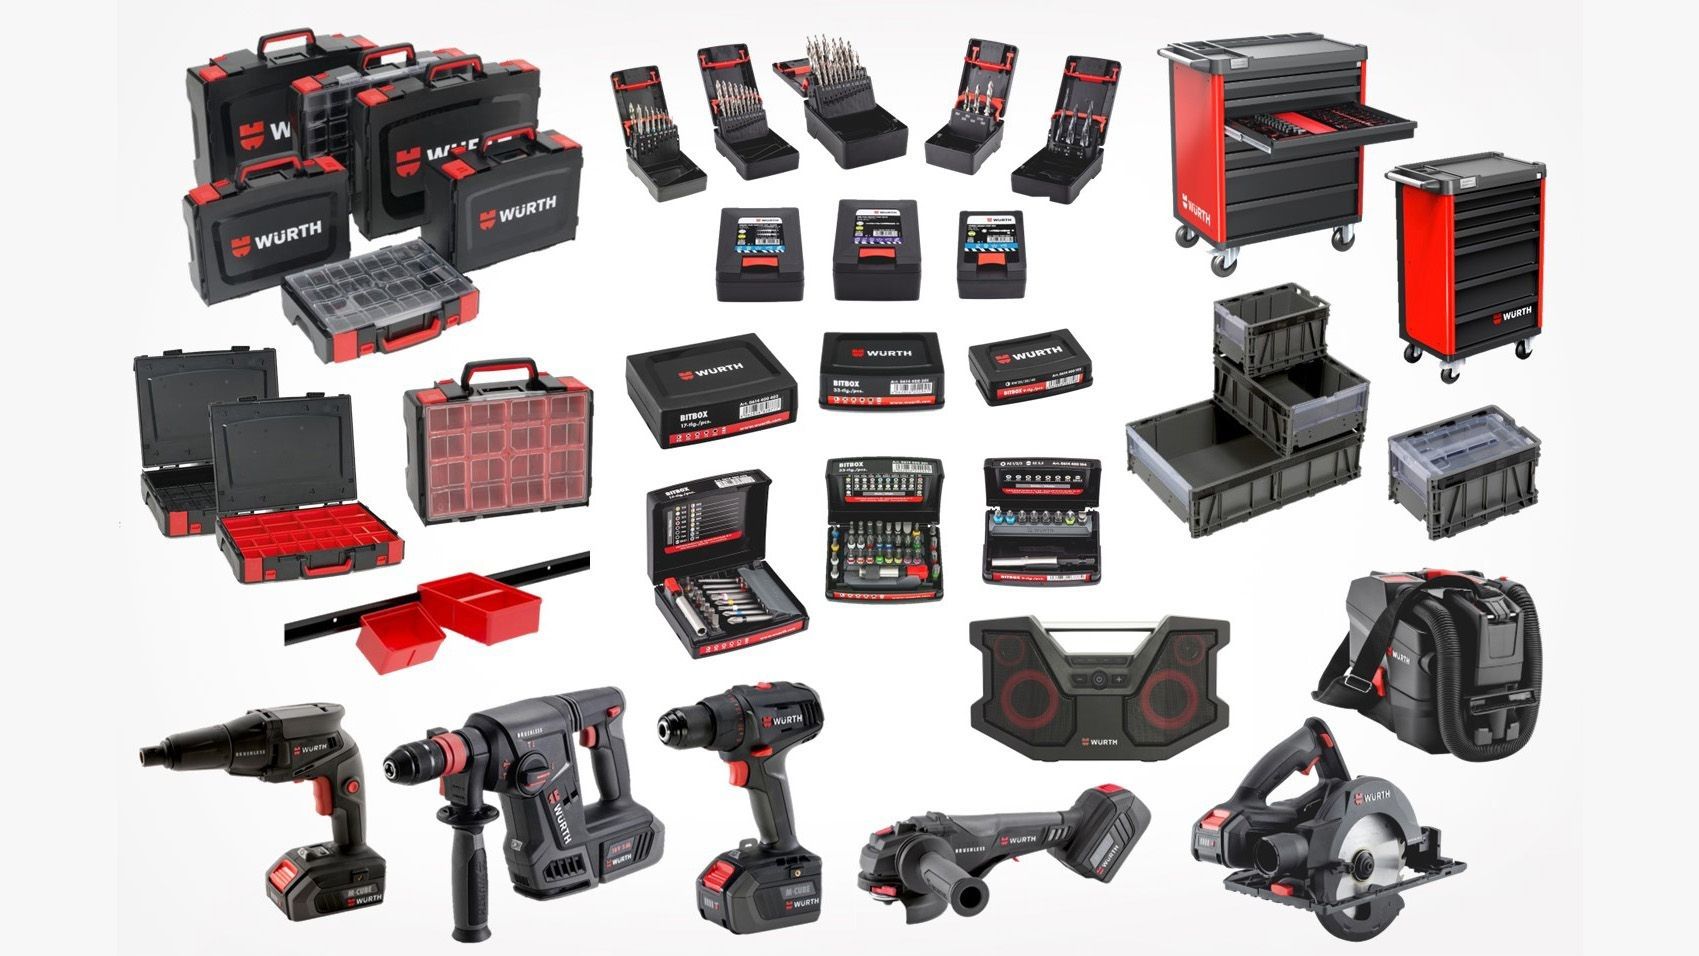 Product overview of Würth